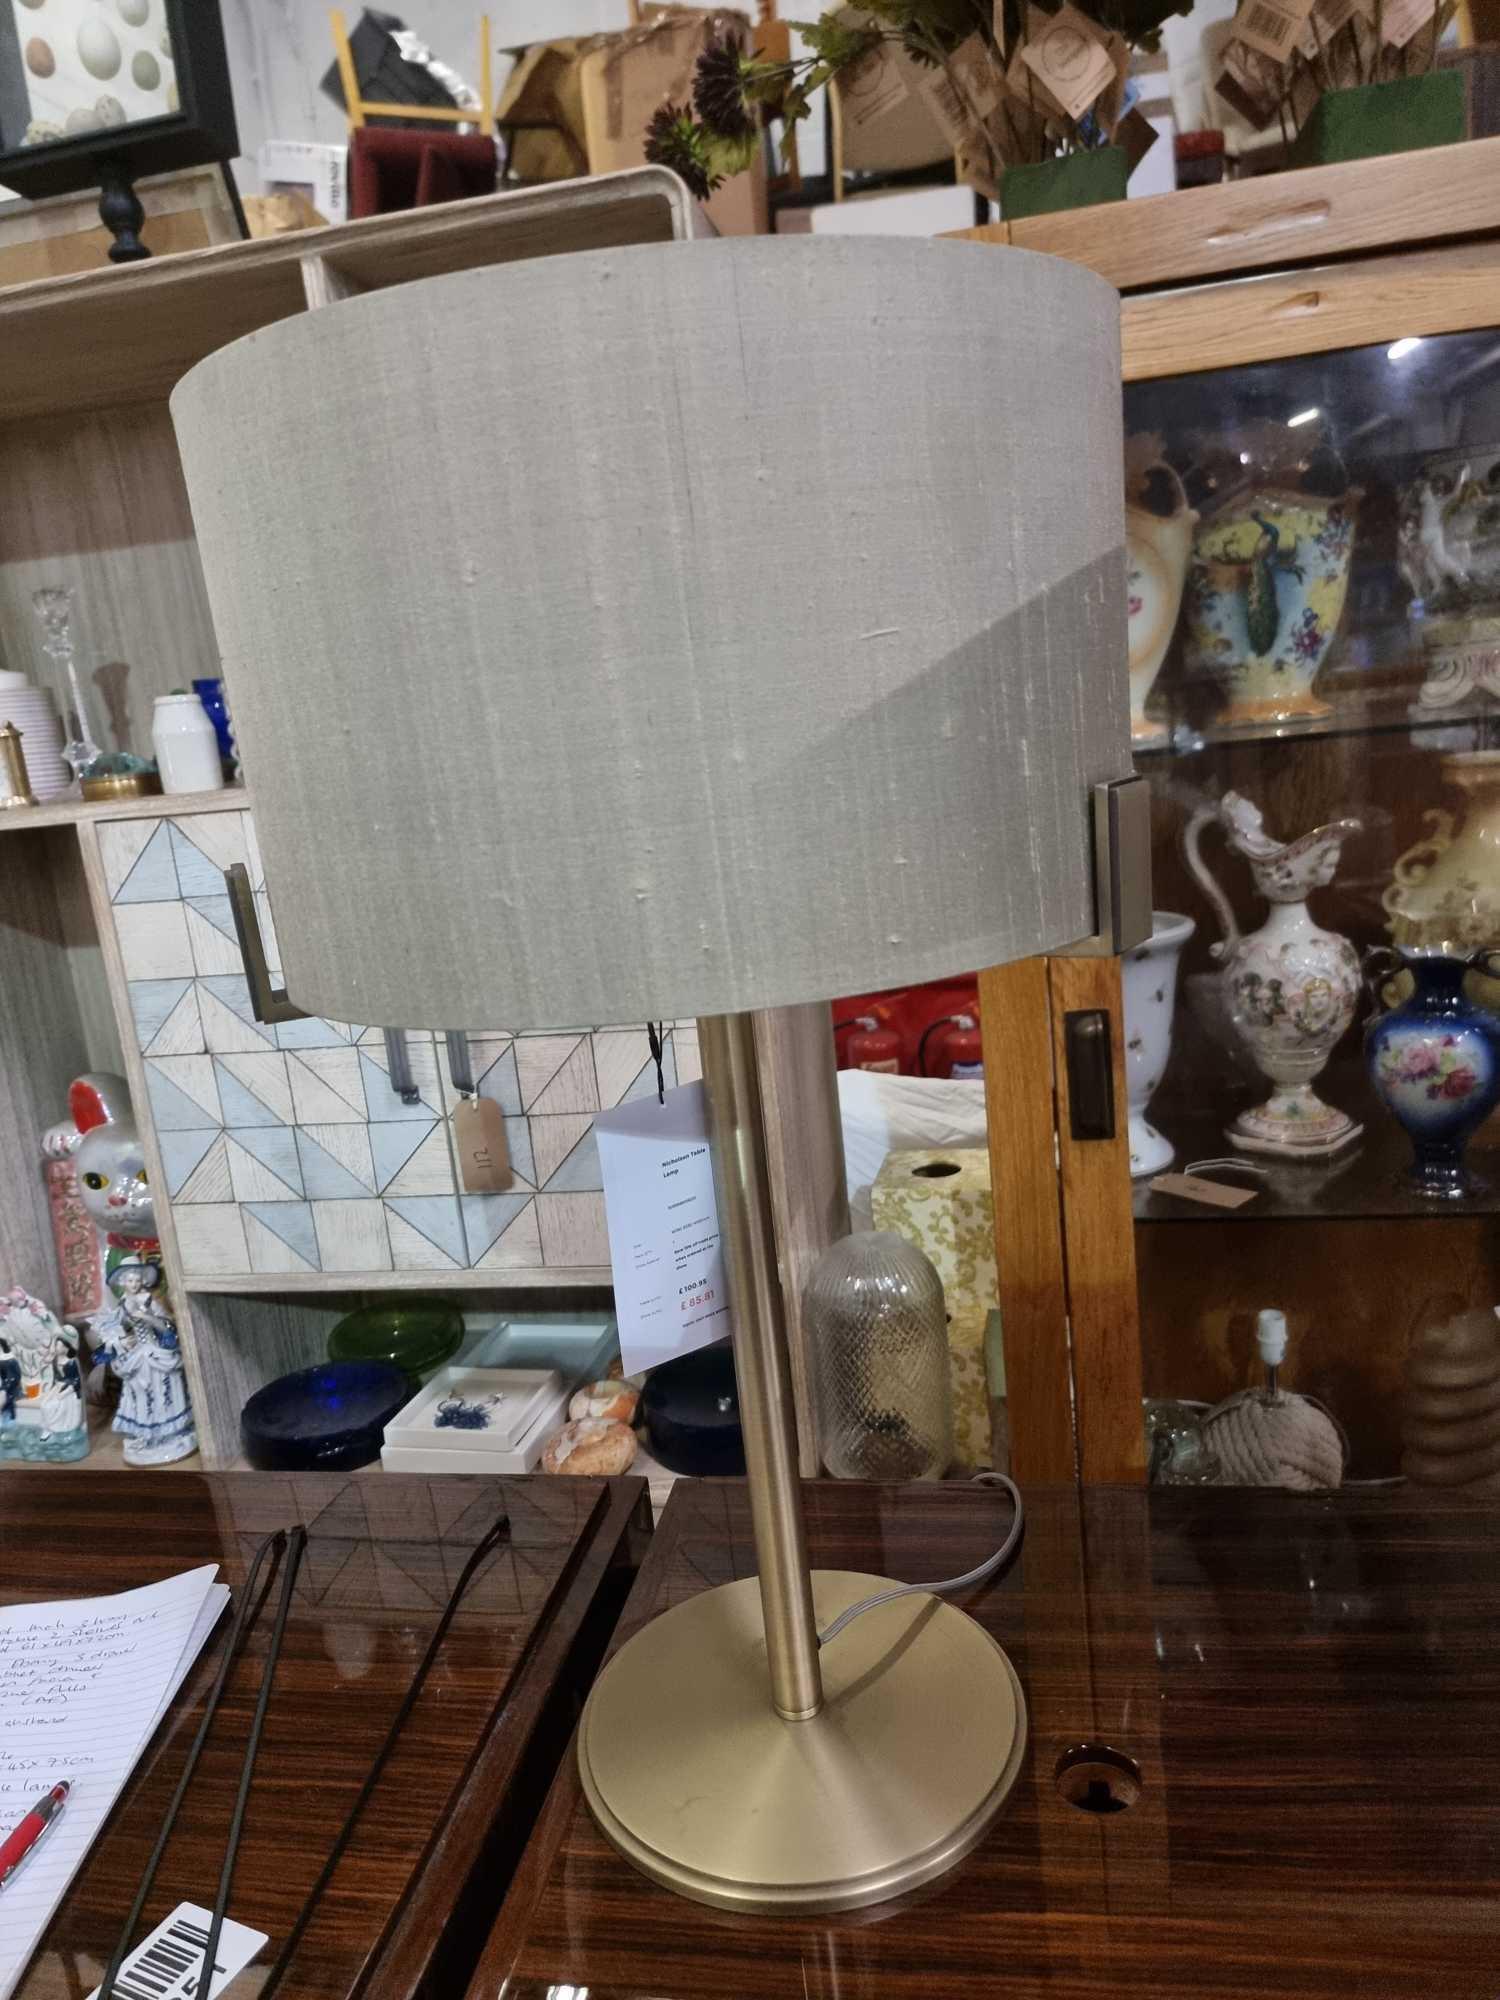 Nicholson Lamp Cleverly Combining Elements Of Contemporary Design With Cool Vintage Flair, This - Image 2 of 5